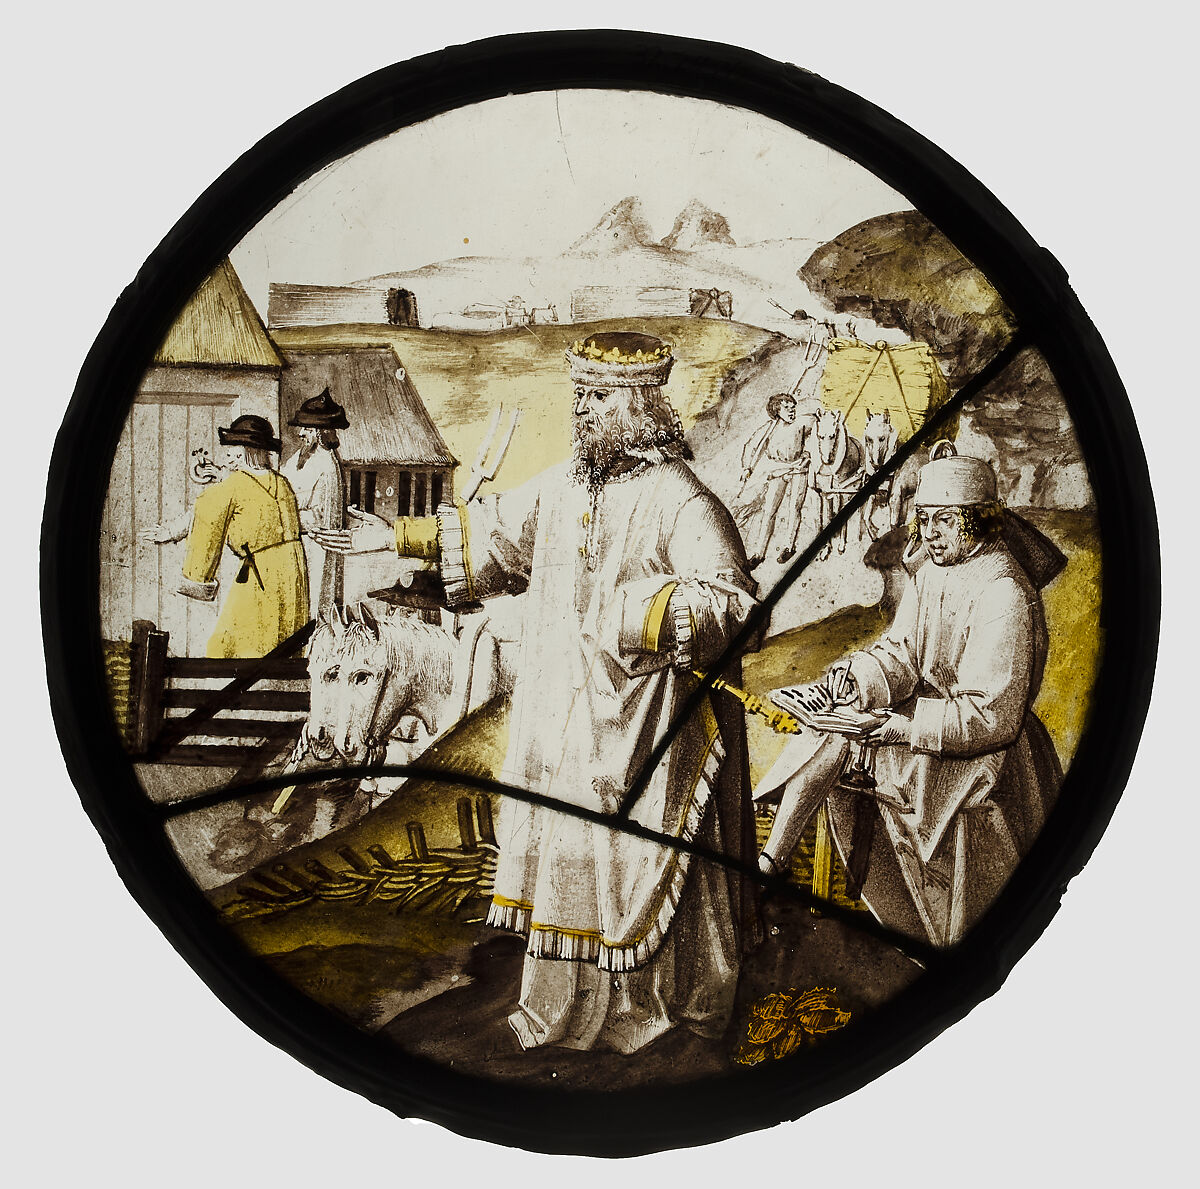 Roundel with Joseph Buying Corn in Egypt, Colorless glass, silver stain, vitreous paint, South Netherlandish 